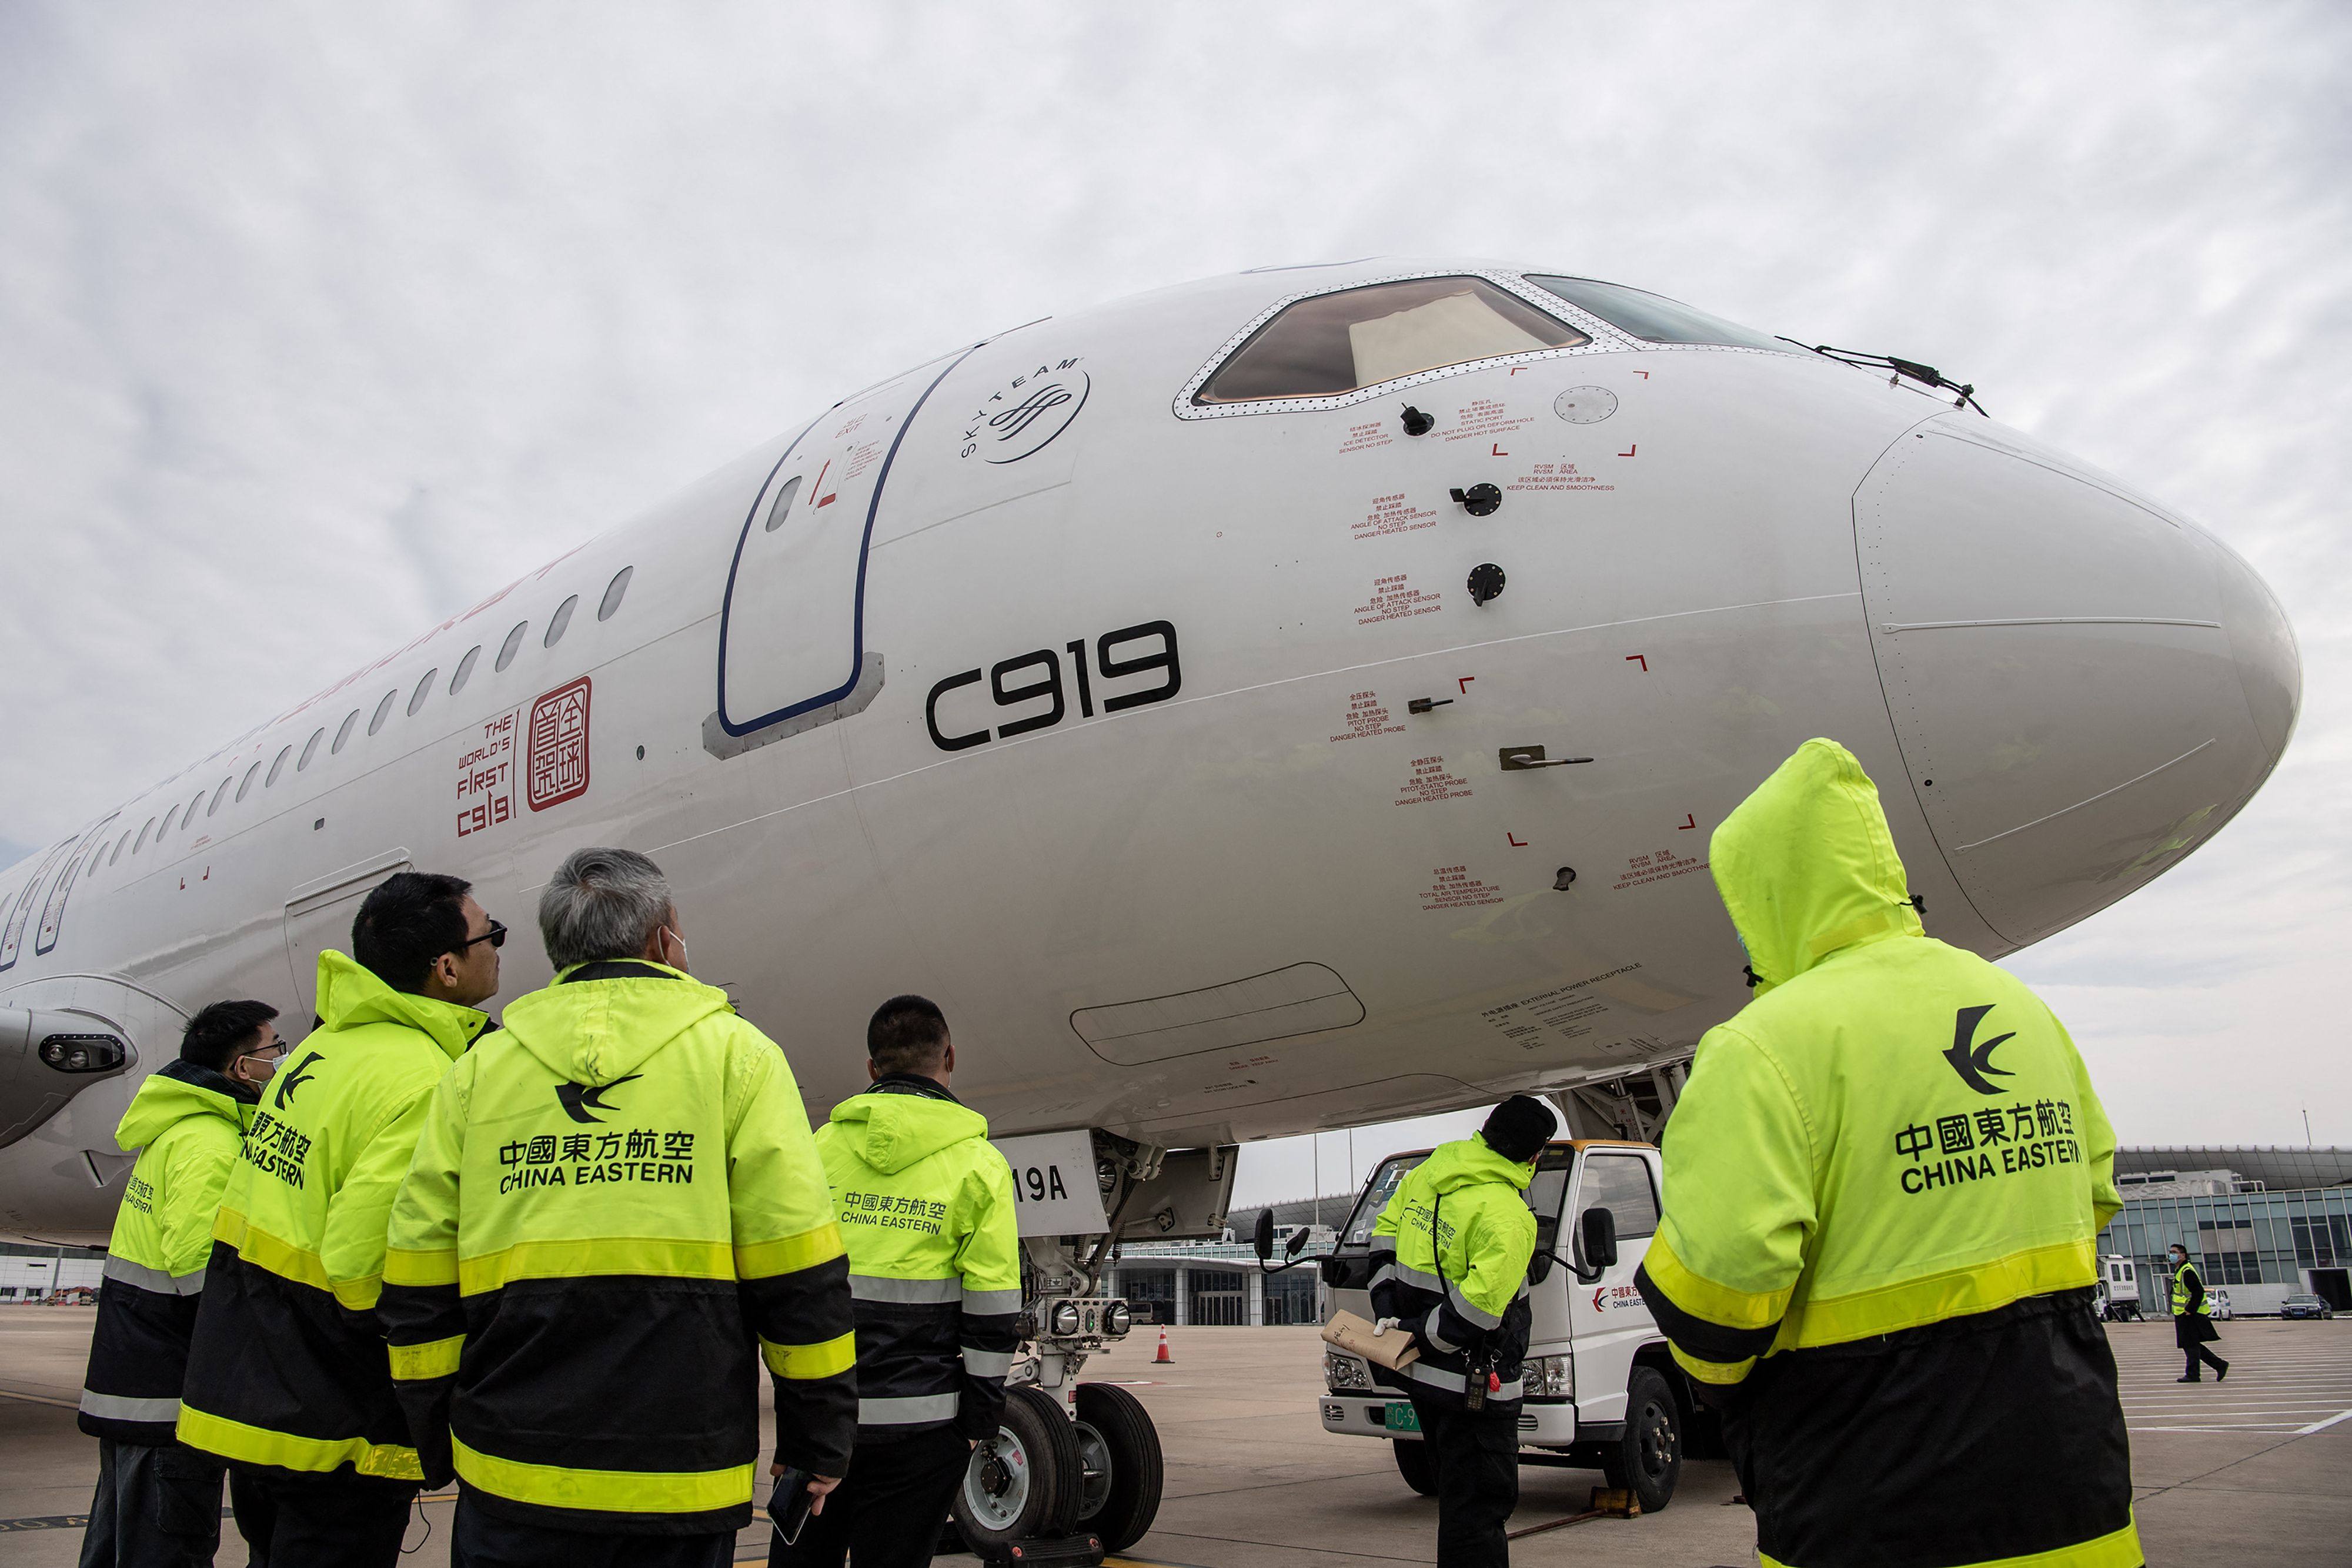 China has strong ambition in the commercial aviation market and the central government has laid out plans for the C919 to gain 10 per cent domestic market share by 2025. Photo: AFP